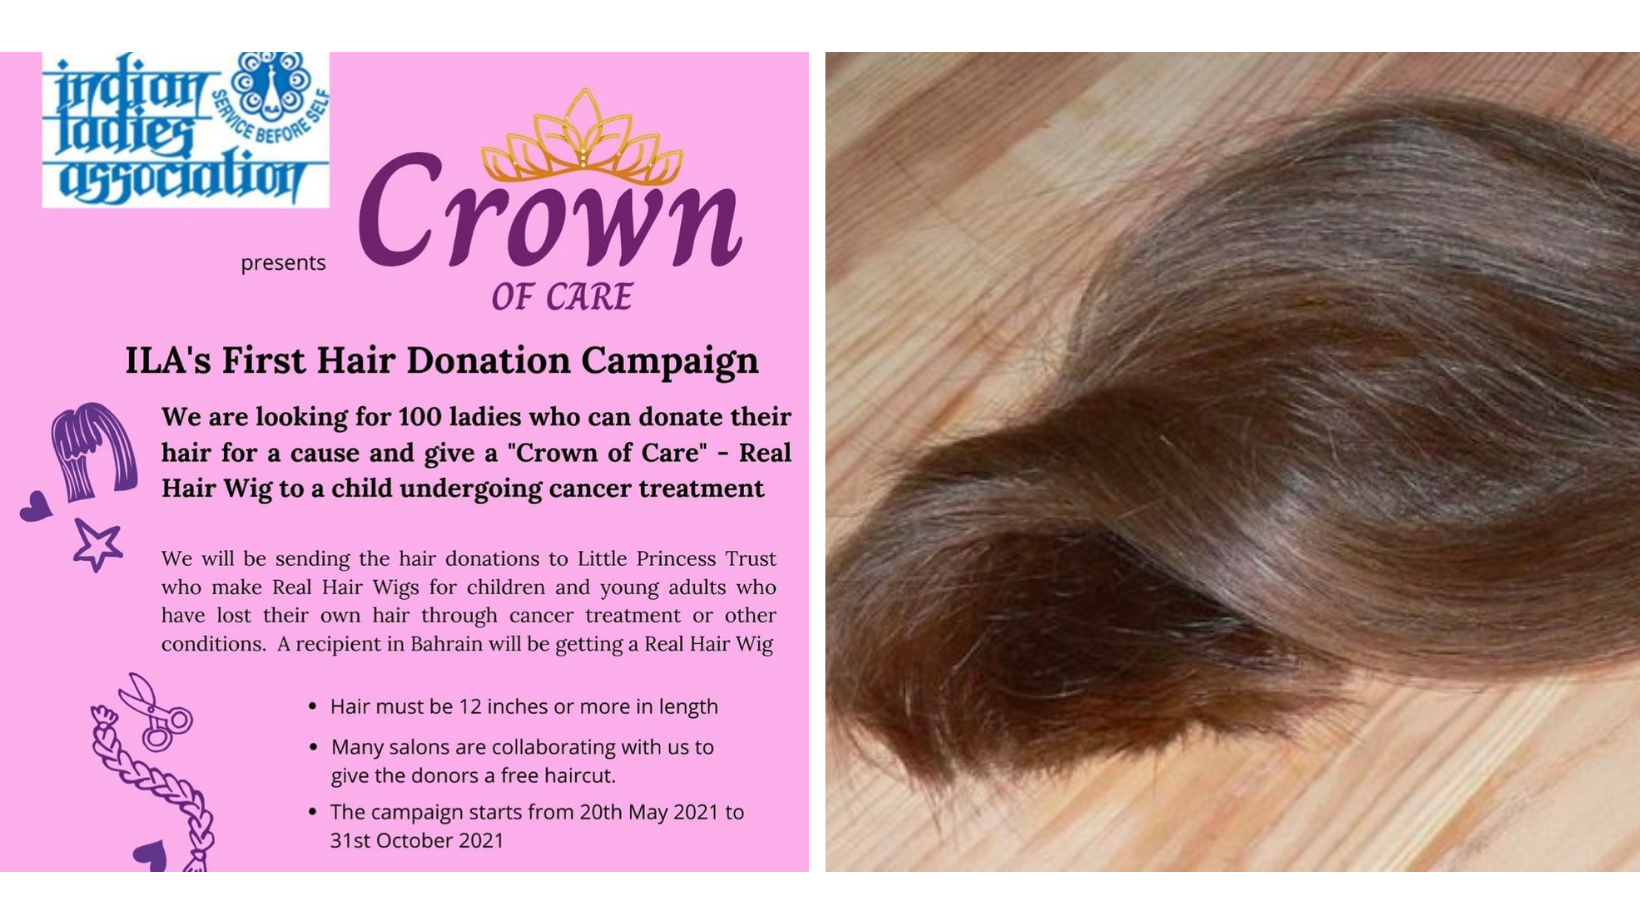 Get your hair cut for a good cause